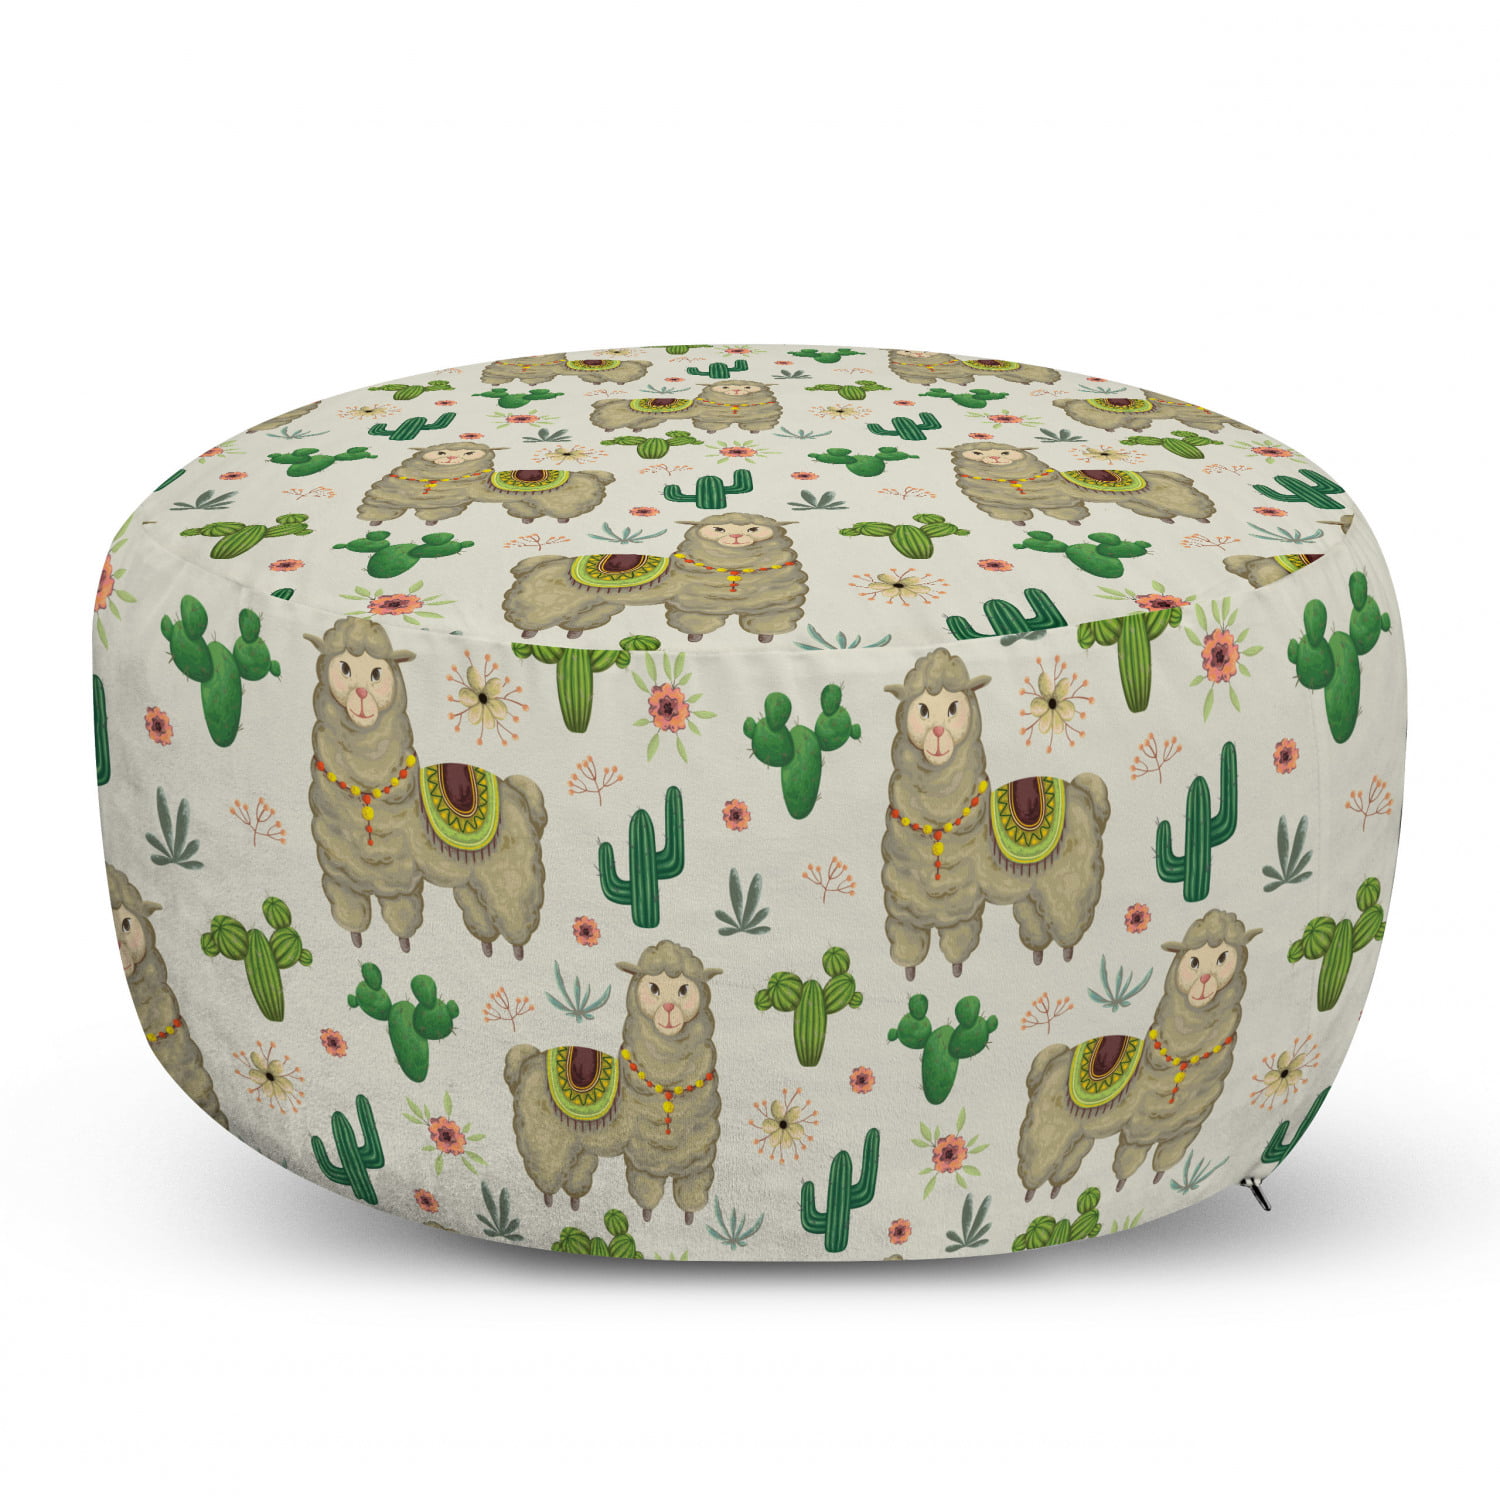 Llama Pouf Cover with Zipper, Flora and Fauna of the South America Llama  and Cactus Plants Hand Drawn Illustration, Soft Decorative Fabric Unstuffed  Case, 30